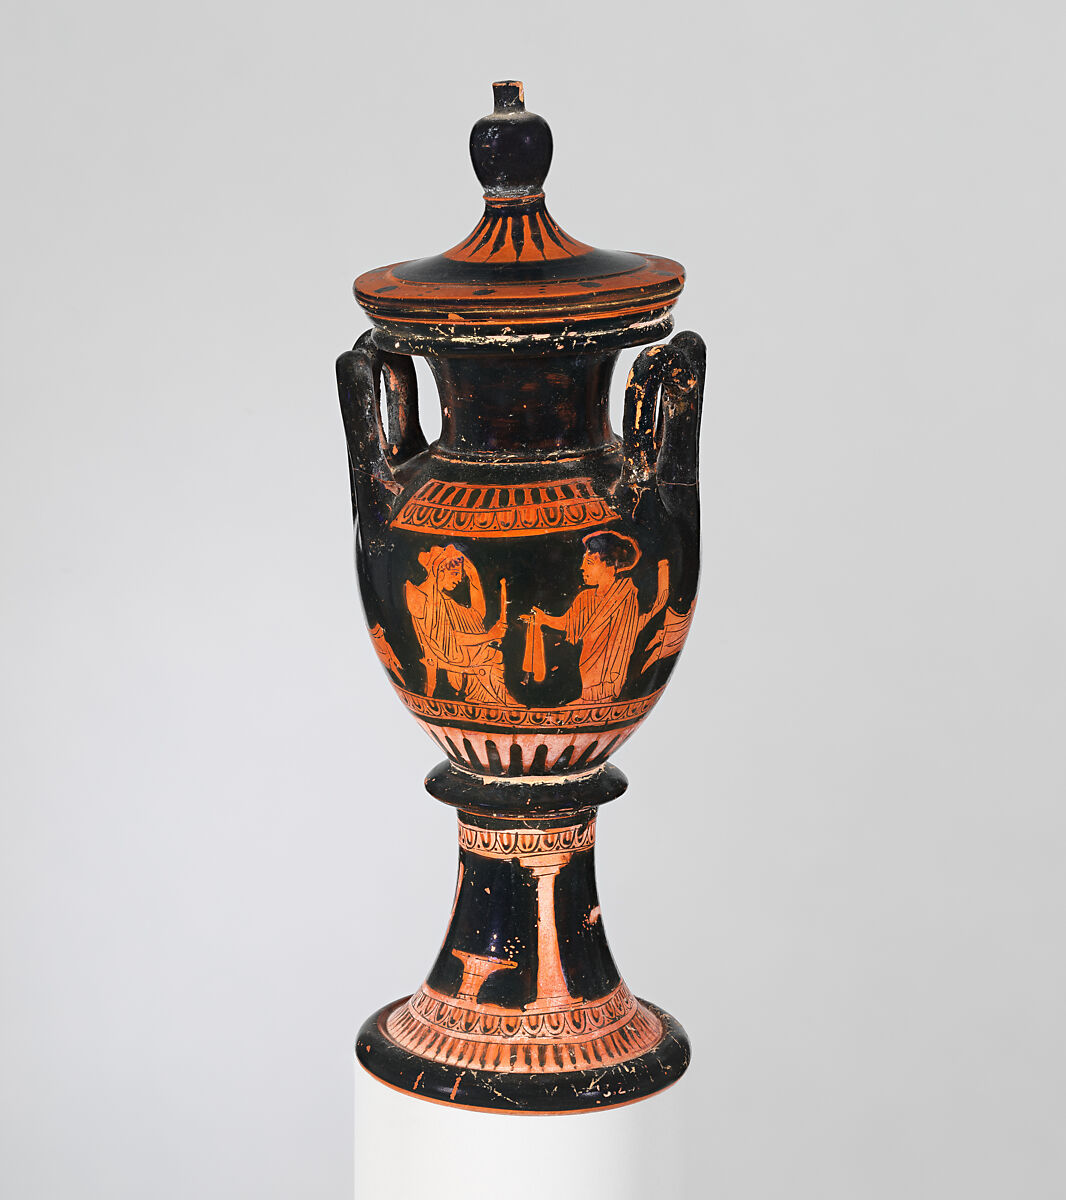 Terracotta lebes gamikos (round-bottomed bowl with handles and stand used in weddings), Attributed to the Group of Berlin 2406, Terracotta, Greek, Attic 